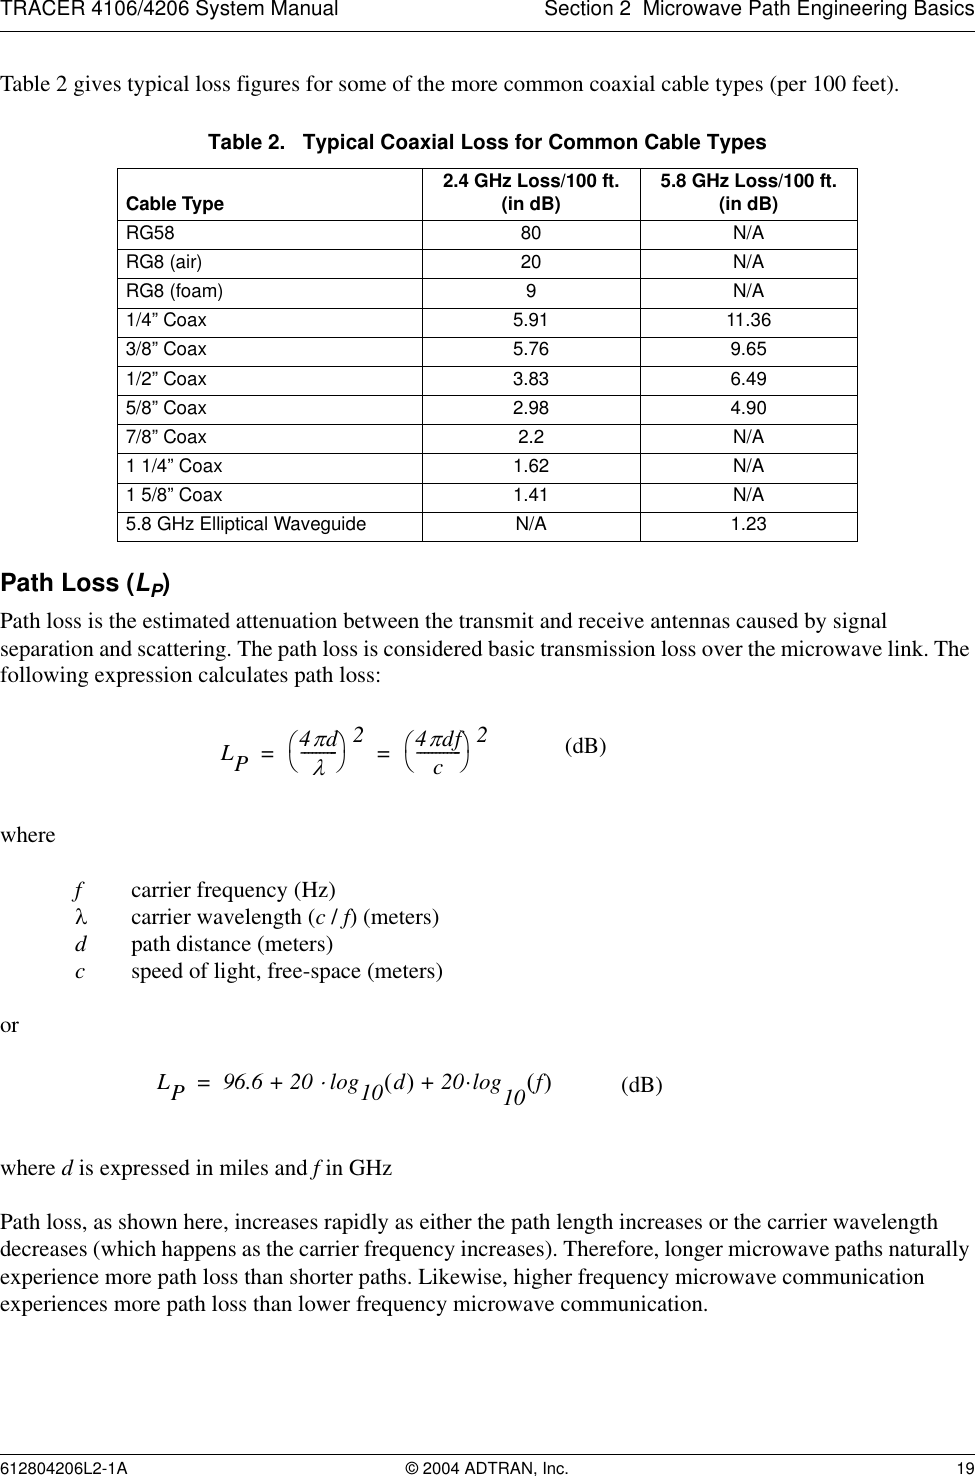 TRACER 4106/4206 System Manual Section 2  Microwave Path Engineering Basics612804206L2-1A © 2004 ADTRAN, Inc. 19Table 2 gives typical loss figures for some of the more common coaxial cable types (per 100 feet).Path Loss (LP)Path loss is the estimated attenuation between the transmit and receive antennas caused by signal separation and scattering. The path loss is considered basic transmission loss over the microwave link. The following expression calculates path loss:where fcarrier frequency (Hz)λcarrier wavelength (c / f) (meters)dpath distance (meters)cspeed of light, free-space (meters)orwhere d is expressed in miles and f in GHzPath loss, as shown here, increases rapidly as either the path length increases or the carrier wavelength decreases (which happens as the carrier frequency increases). Therefore, longer microwave paths naturally experience more path loss than shorter paths. Likewise, higher frequency microwave communication experiences more path loss than lower frequency microwave communication.Table 2.   Typical Coaxial Loss for Common Cable TypesCable Type 2.4 GHz Loss/100 ft. (in dB) 5.8 GHz Loss/100 ft. (in dB)RG58 80 N/ARG8 (air) 20 N/ARG8 (foam) 9 N/A1/4” Coax 5.91 11.363/8” Coax 5.76 9.651/2” Coax 3.83 6.495/8” Coax 2.98 4.907/8” Coax 2.2 N/A1 1/4” Coax 1.62 N/A1 5/8” Coax 1.41 N/A5.8 GHz Elliptical Waveguide N/A 1.23LP4πdλ----------24πdfc------------2== (dB)LP96.6 20 log10 d() 20·log+10 f()⋅+= (dB)